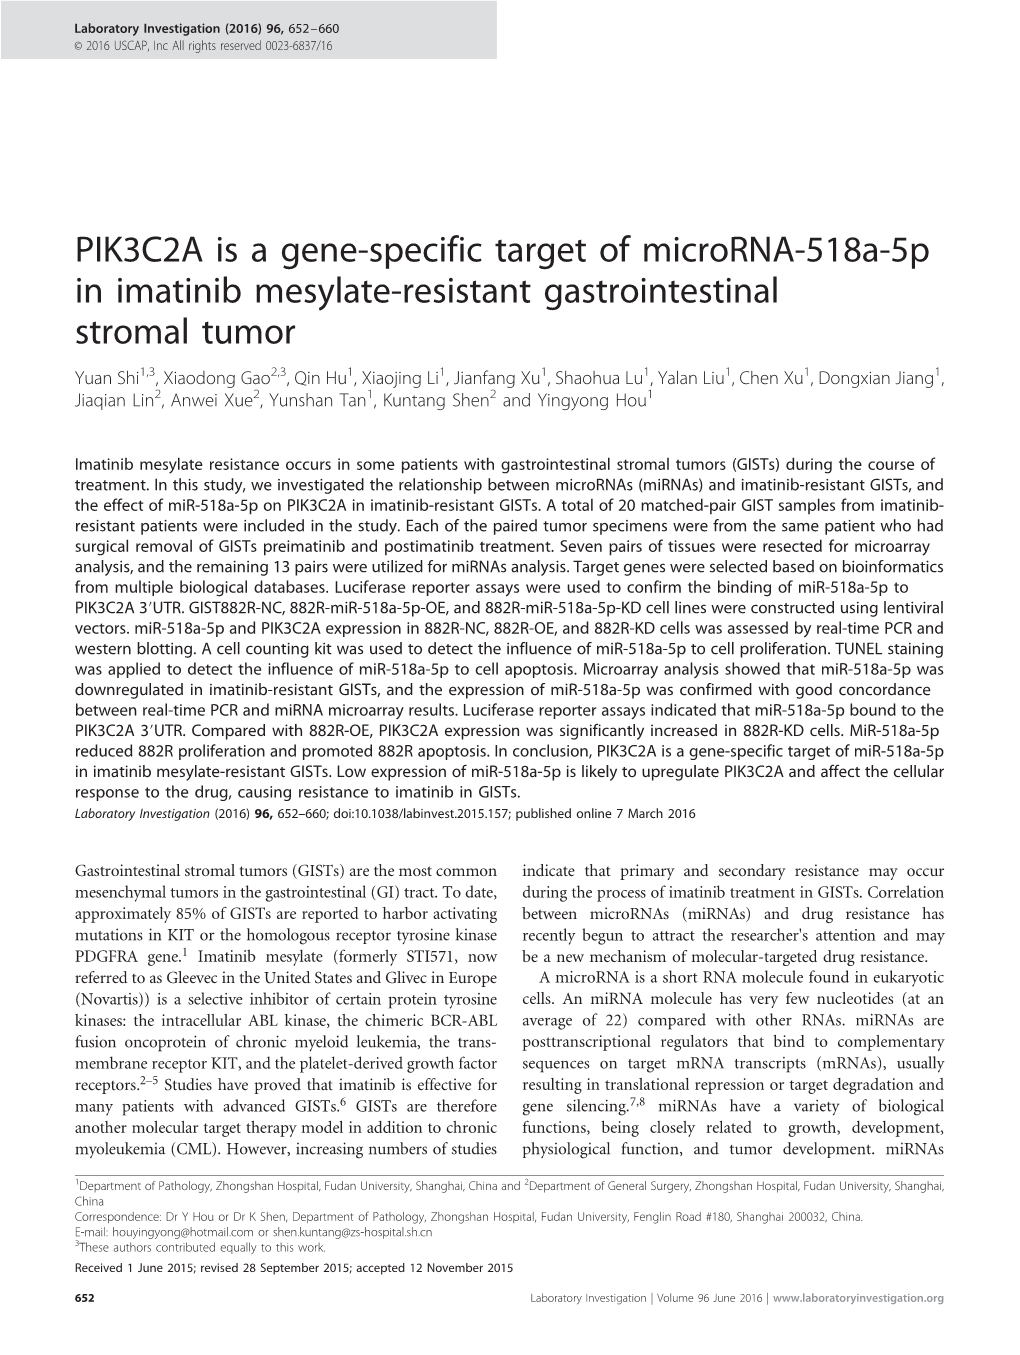 PIK3C2A Is a Gene-Specific Target of Microrna-518A-5P in Imatinib